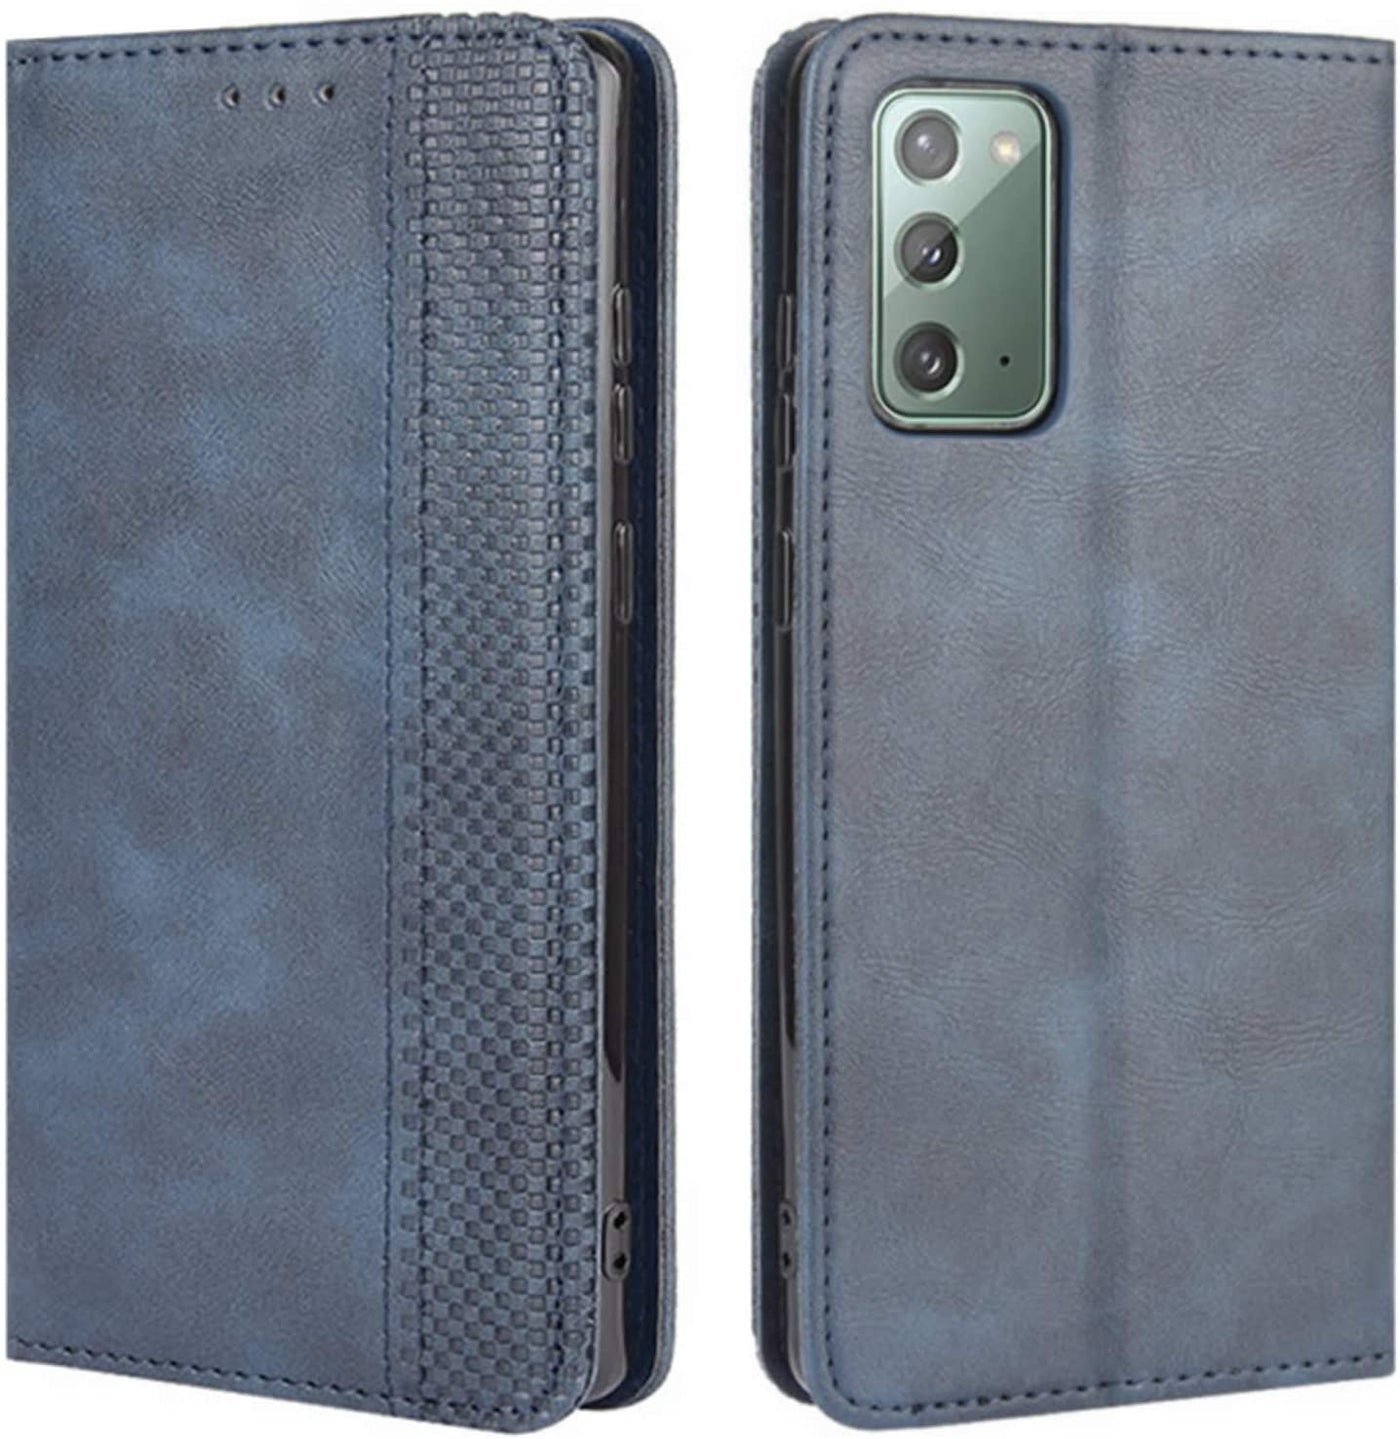 Samsung Galaxy Note 20 blue color leather wallet flip cover case By excelsior